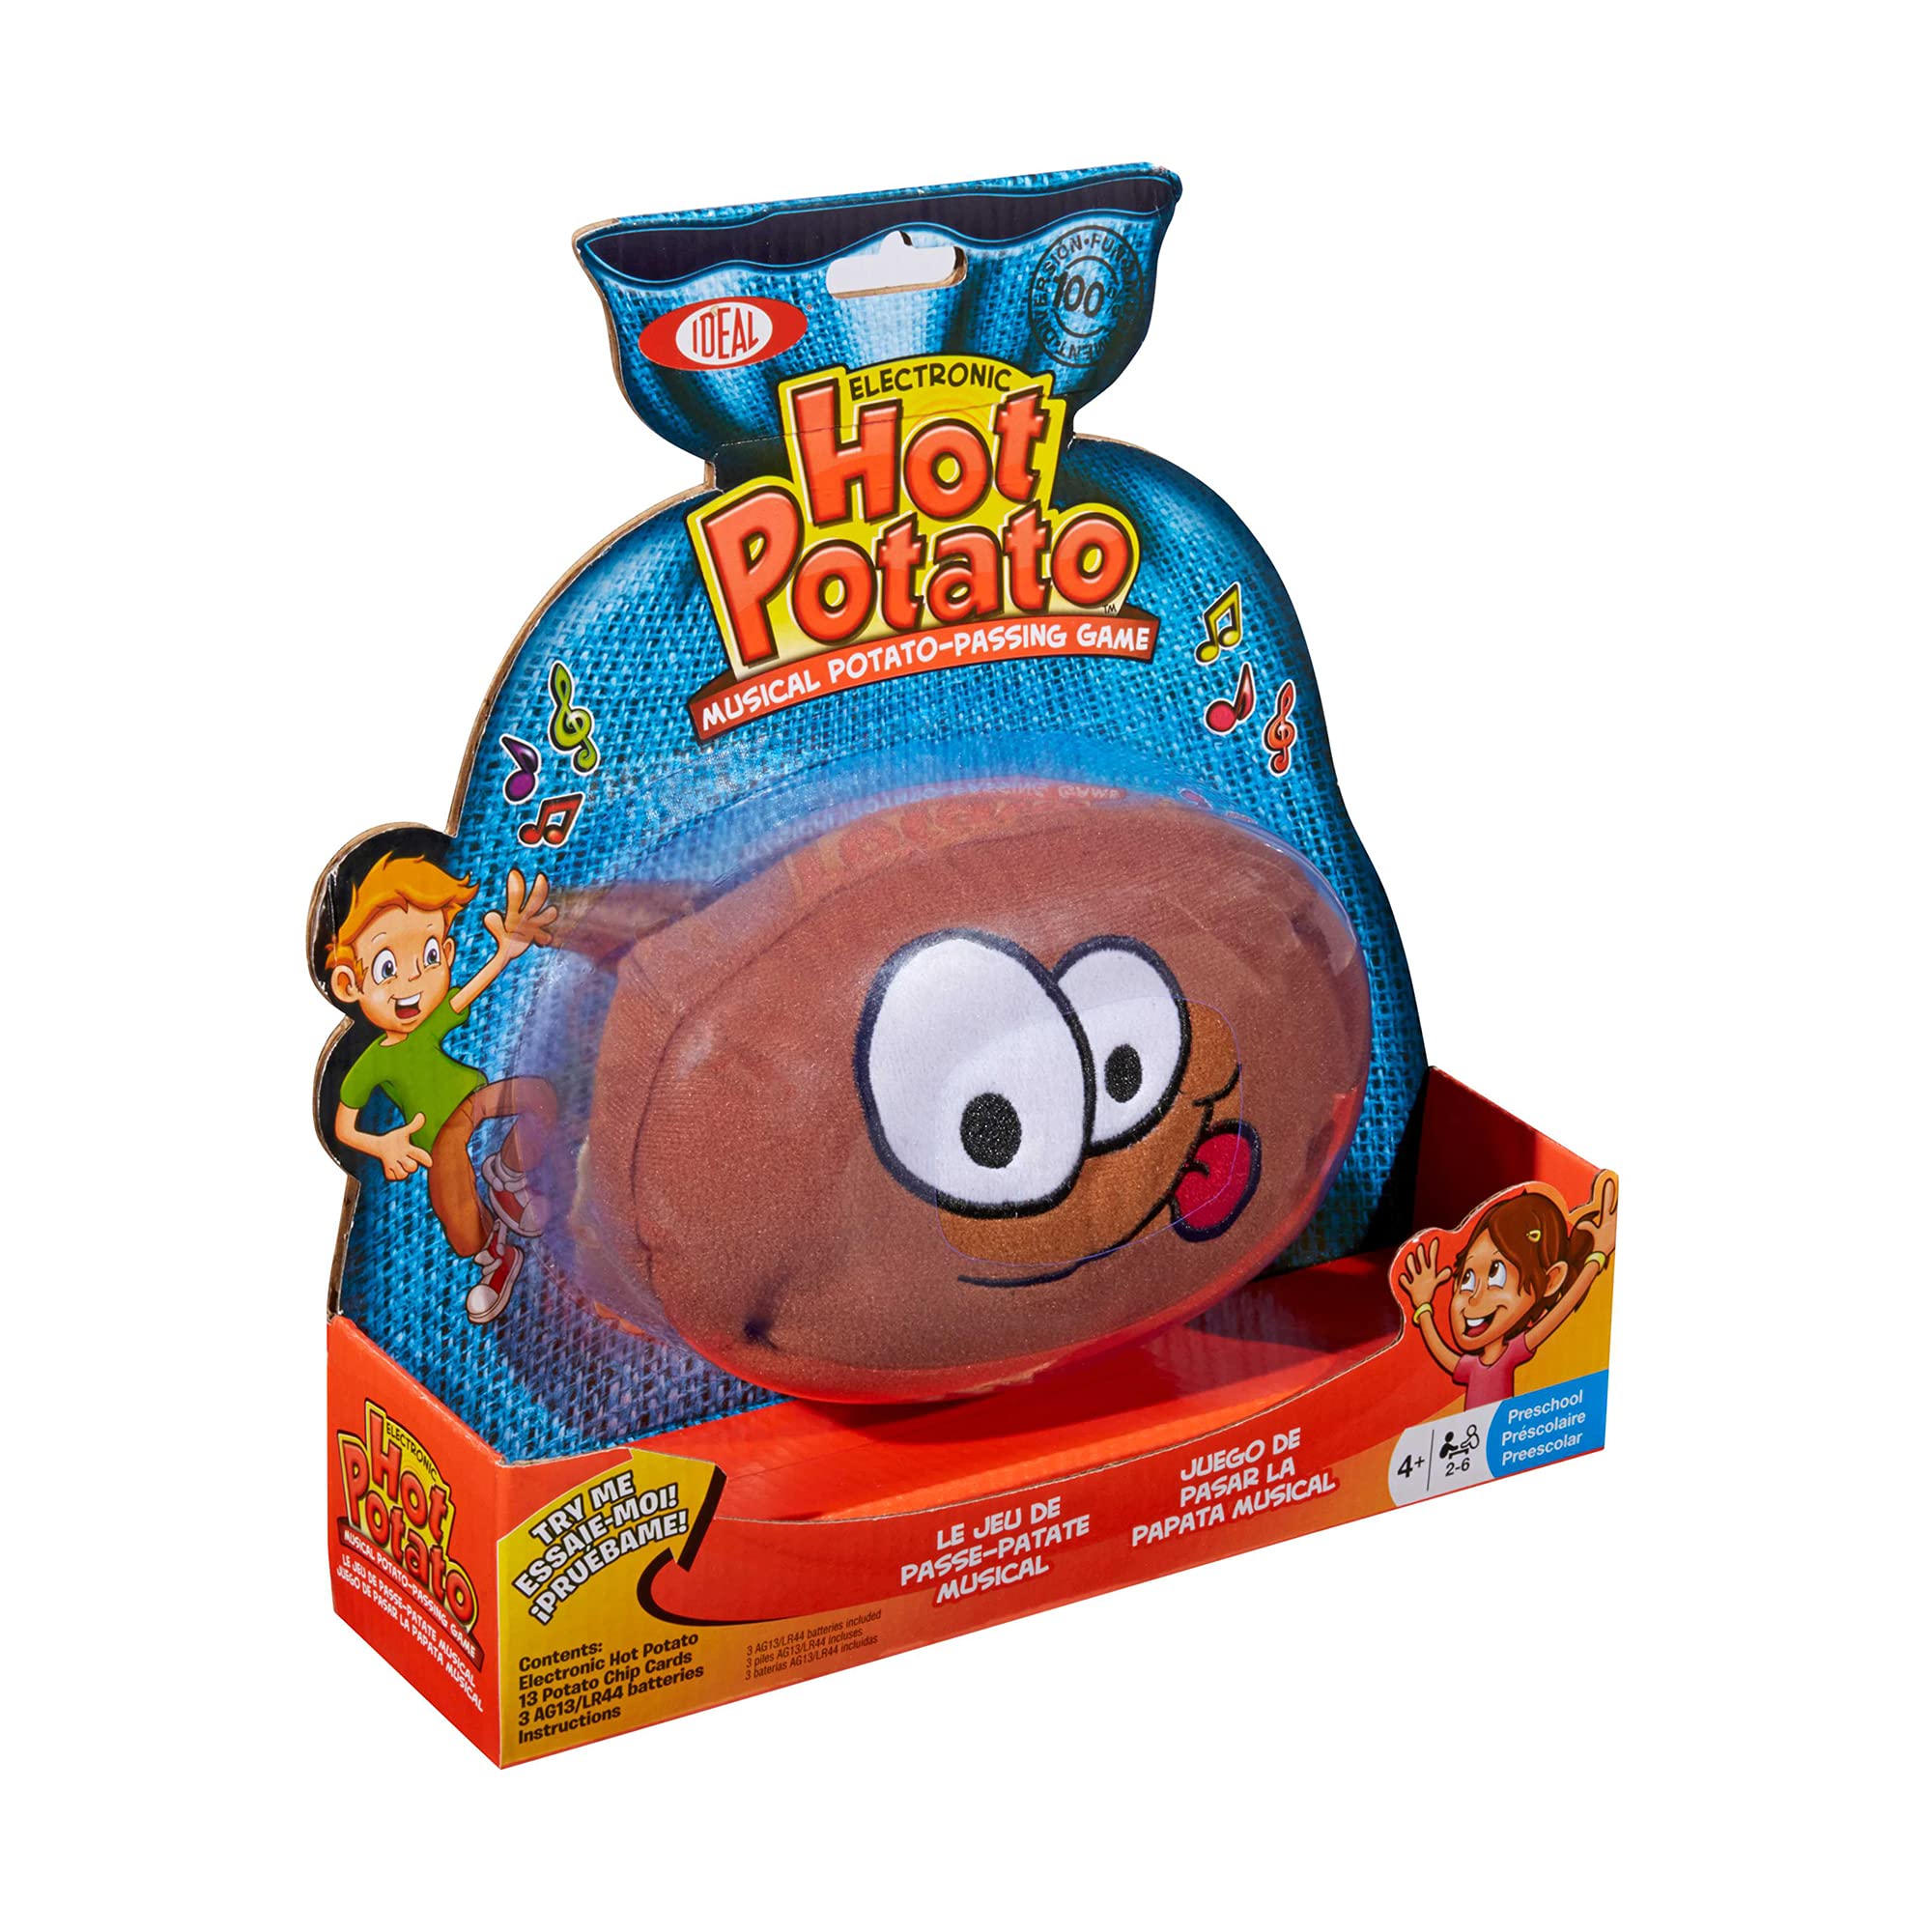 ALEX Toys Ideal Hot Potato Electronic Musical Passing Kids Party Game, Don’t Get Caught With the Spud When the Music Stops! Ages 4+, 2-6 Players, Brown